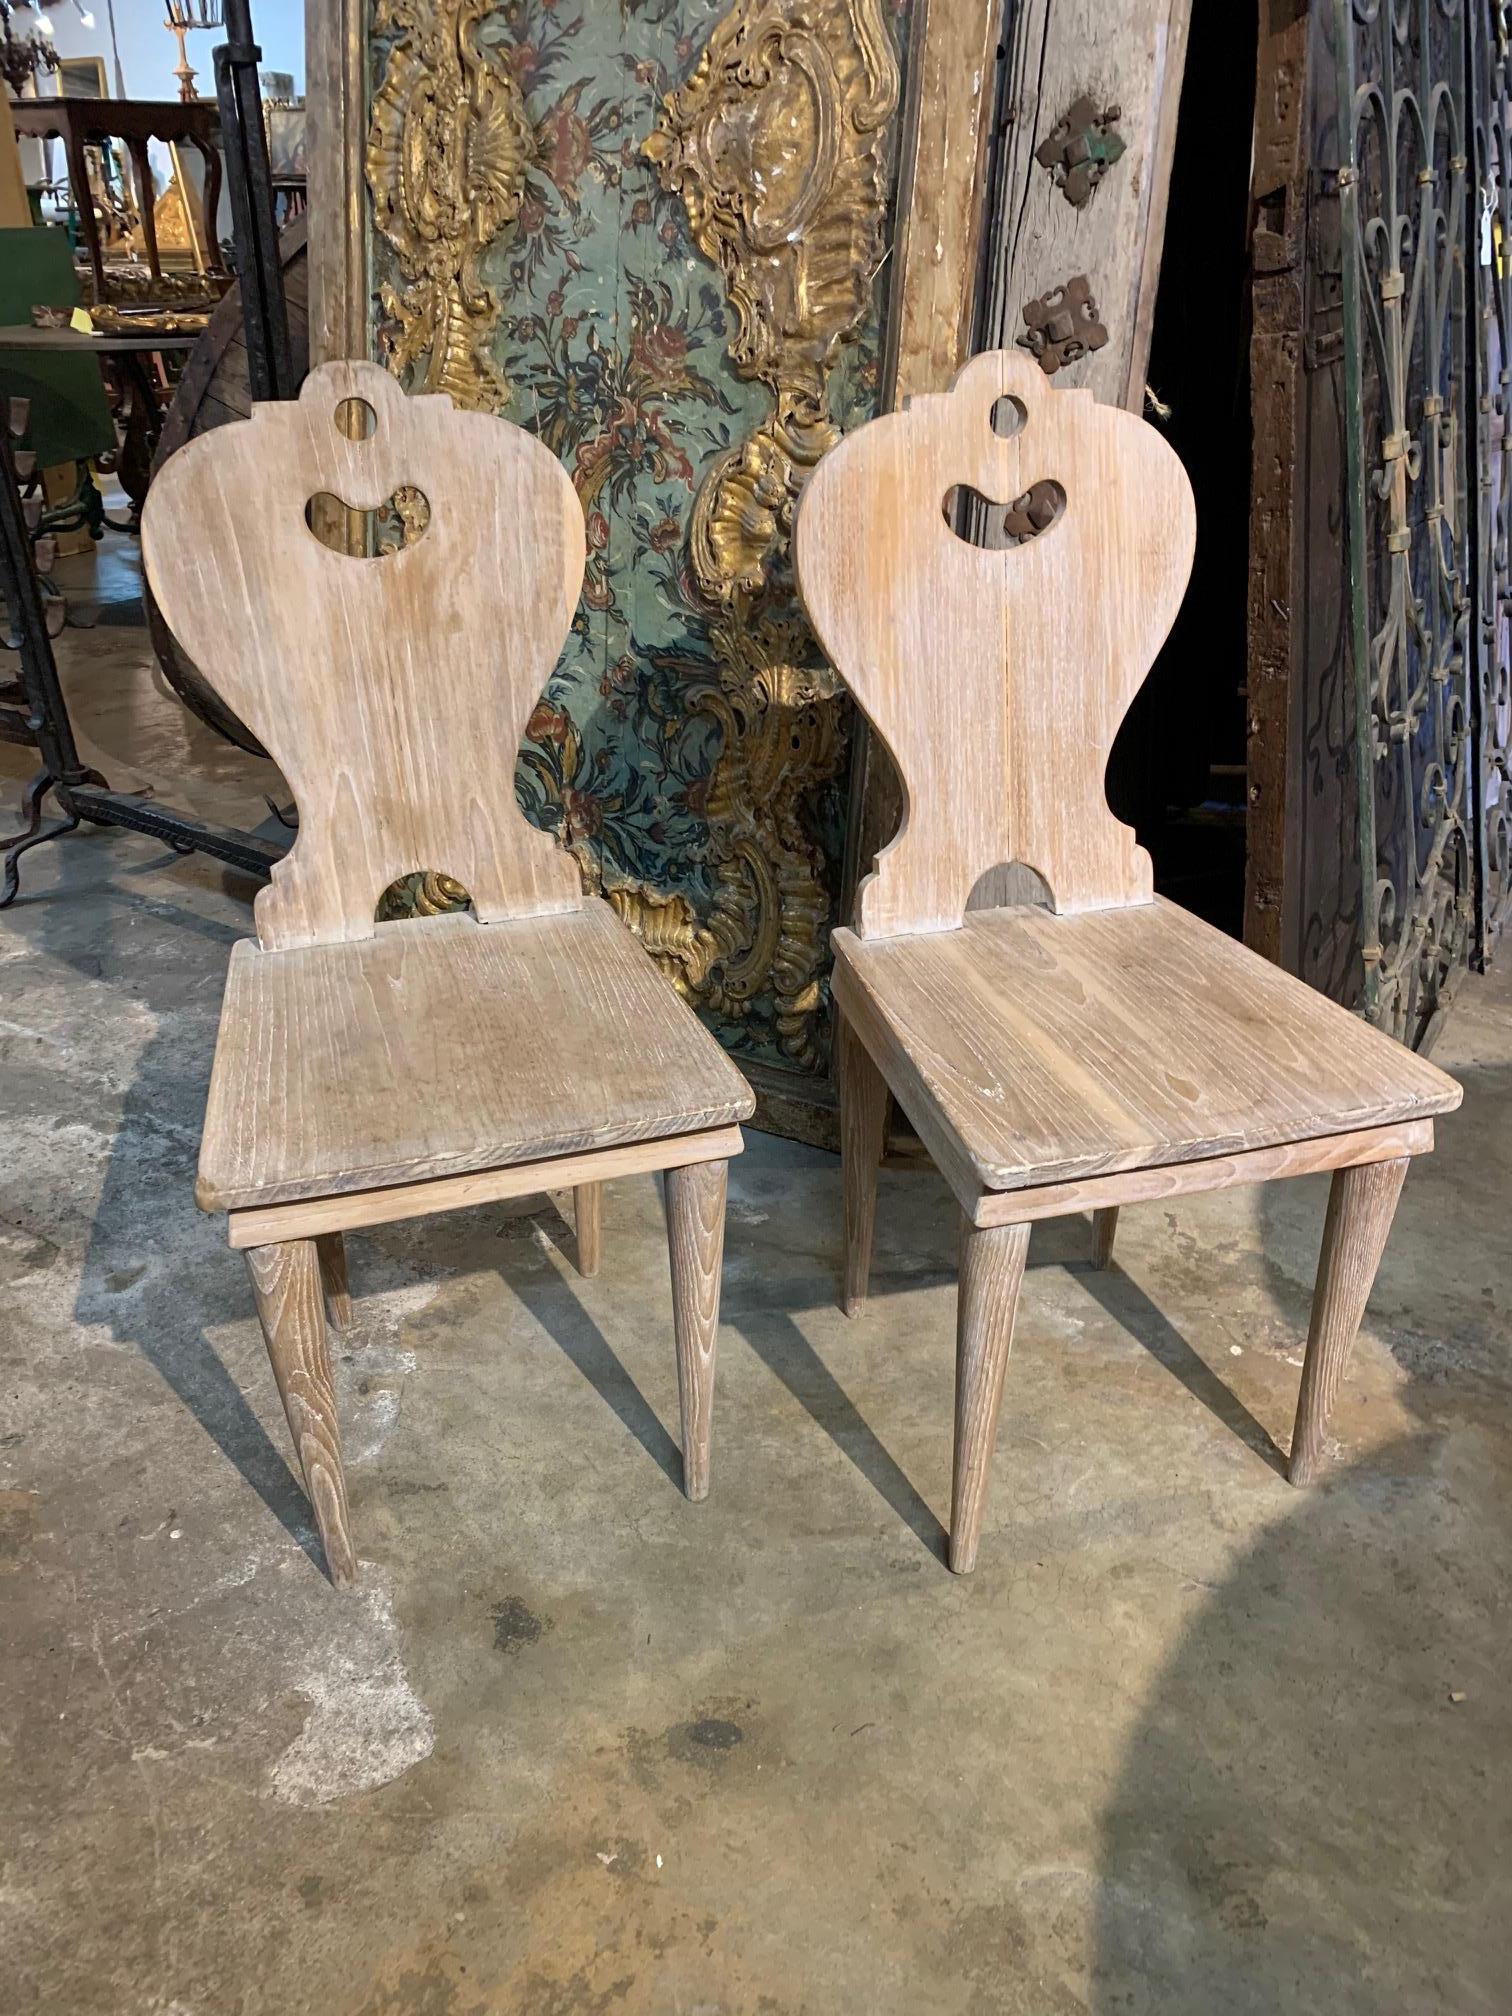 Pair of Arte Populaire - Folk Art dining chairs from the Ardeche region of France. Soundly constructed from scraped wood with a wonderfully shaped back and tapered legs.